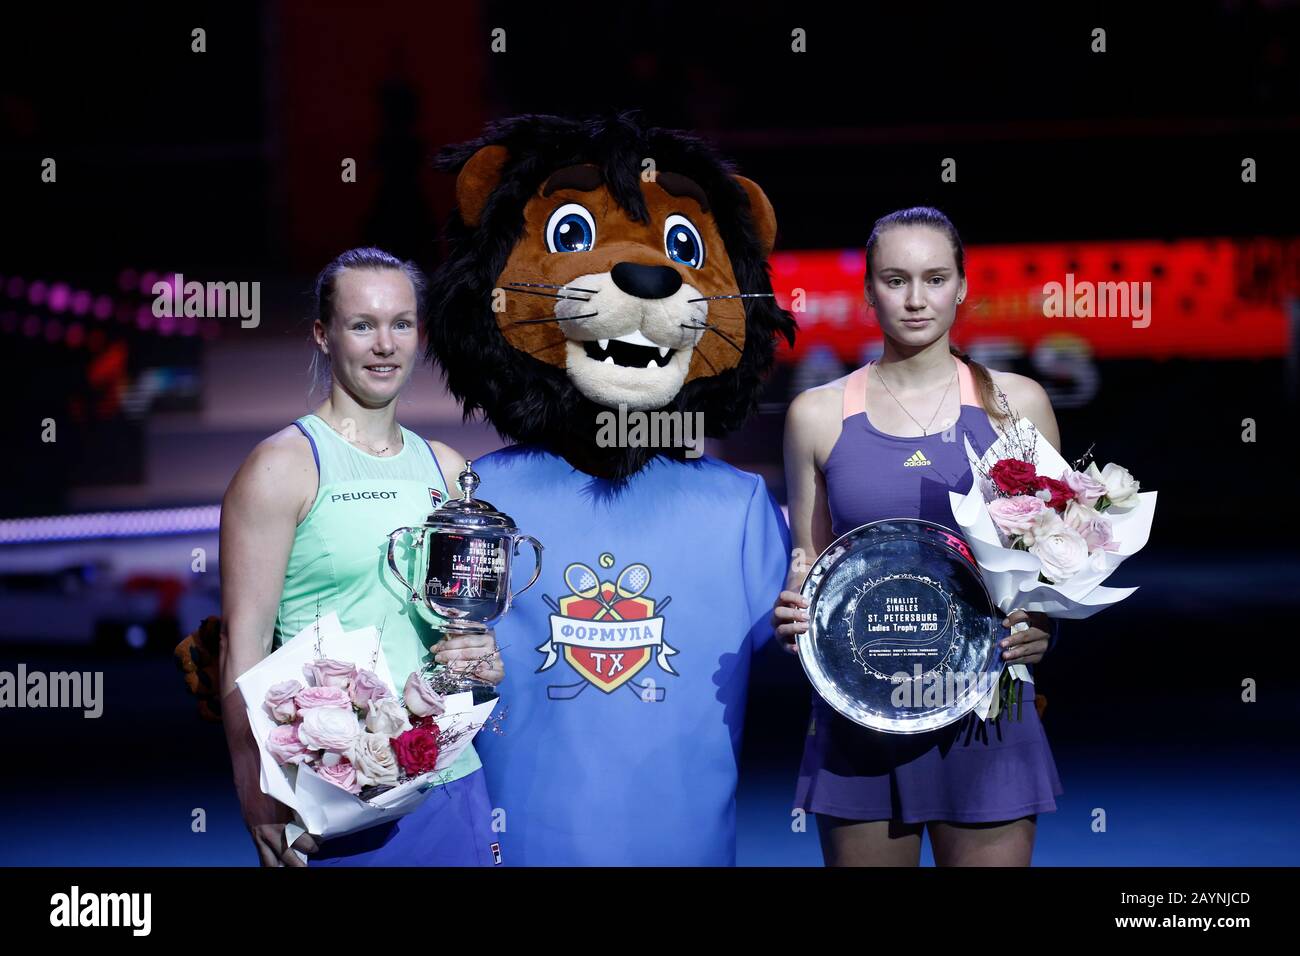 Kiki Bertens (L) Netherlands and Elena Rybakina (R) pose for a photo the final match of the St.Petersburg Trophy 2020 tennis tournament at Sibur Arena Stock Photo Alamy